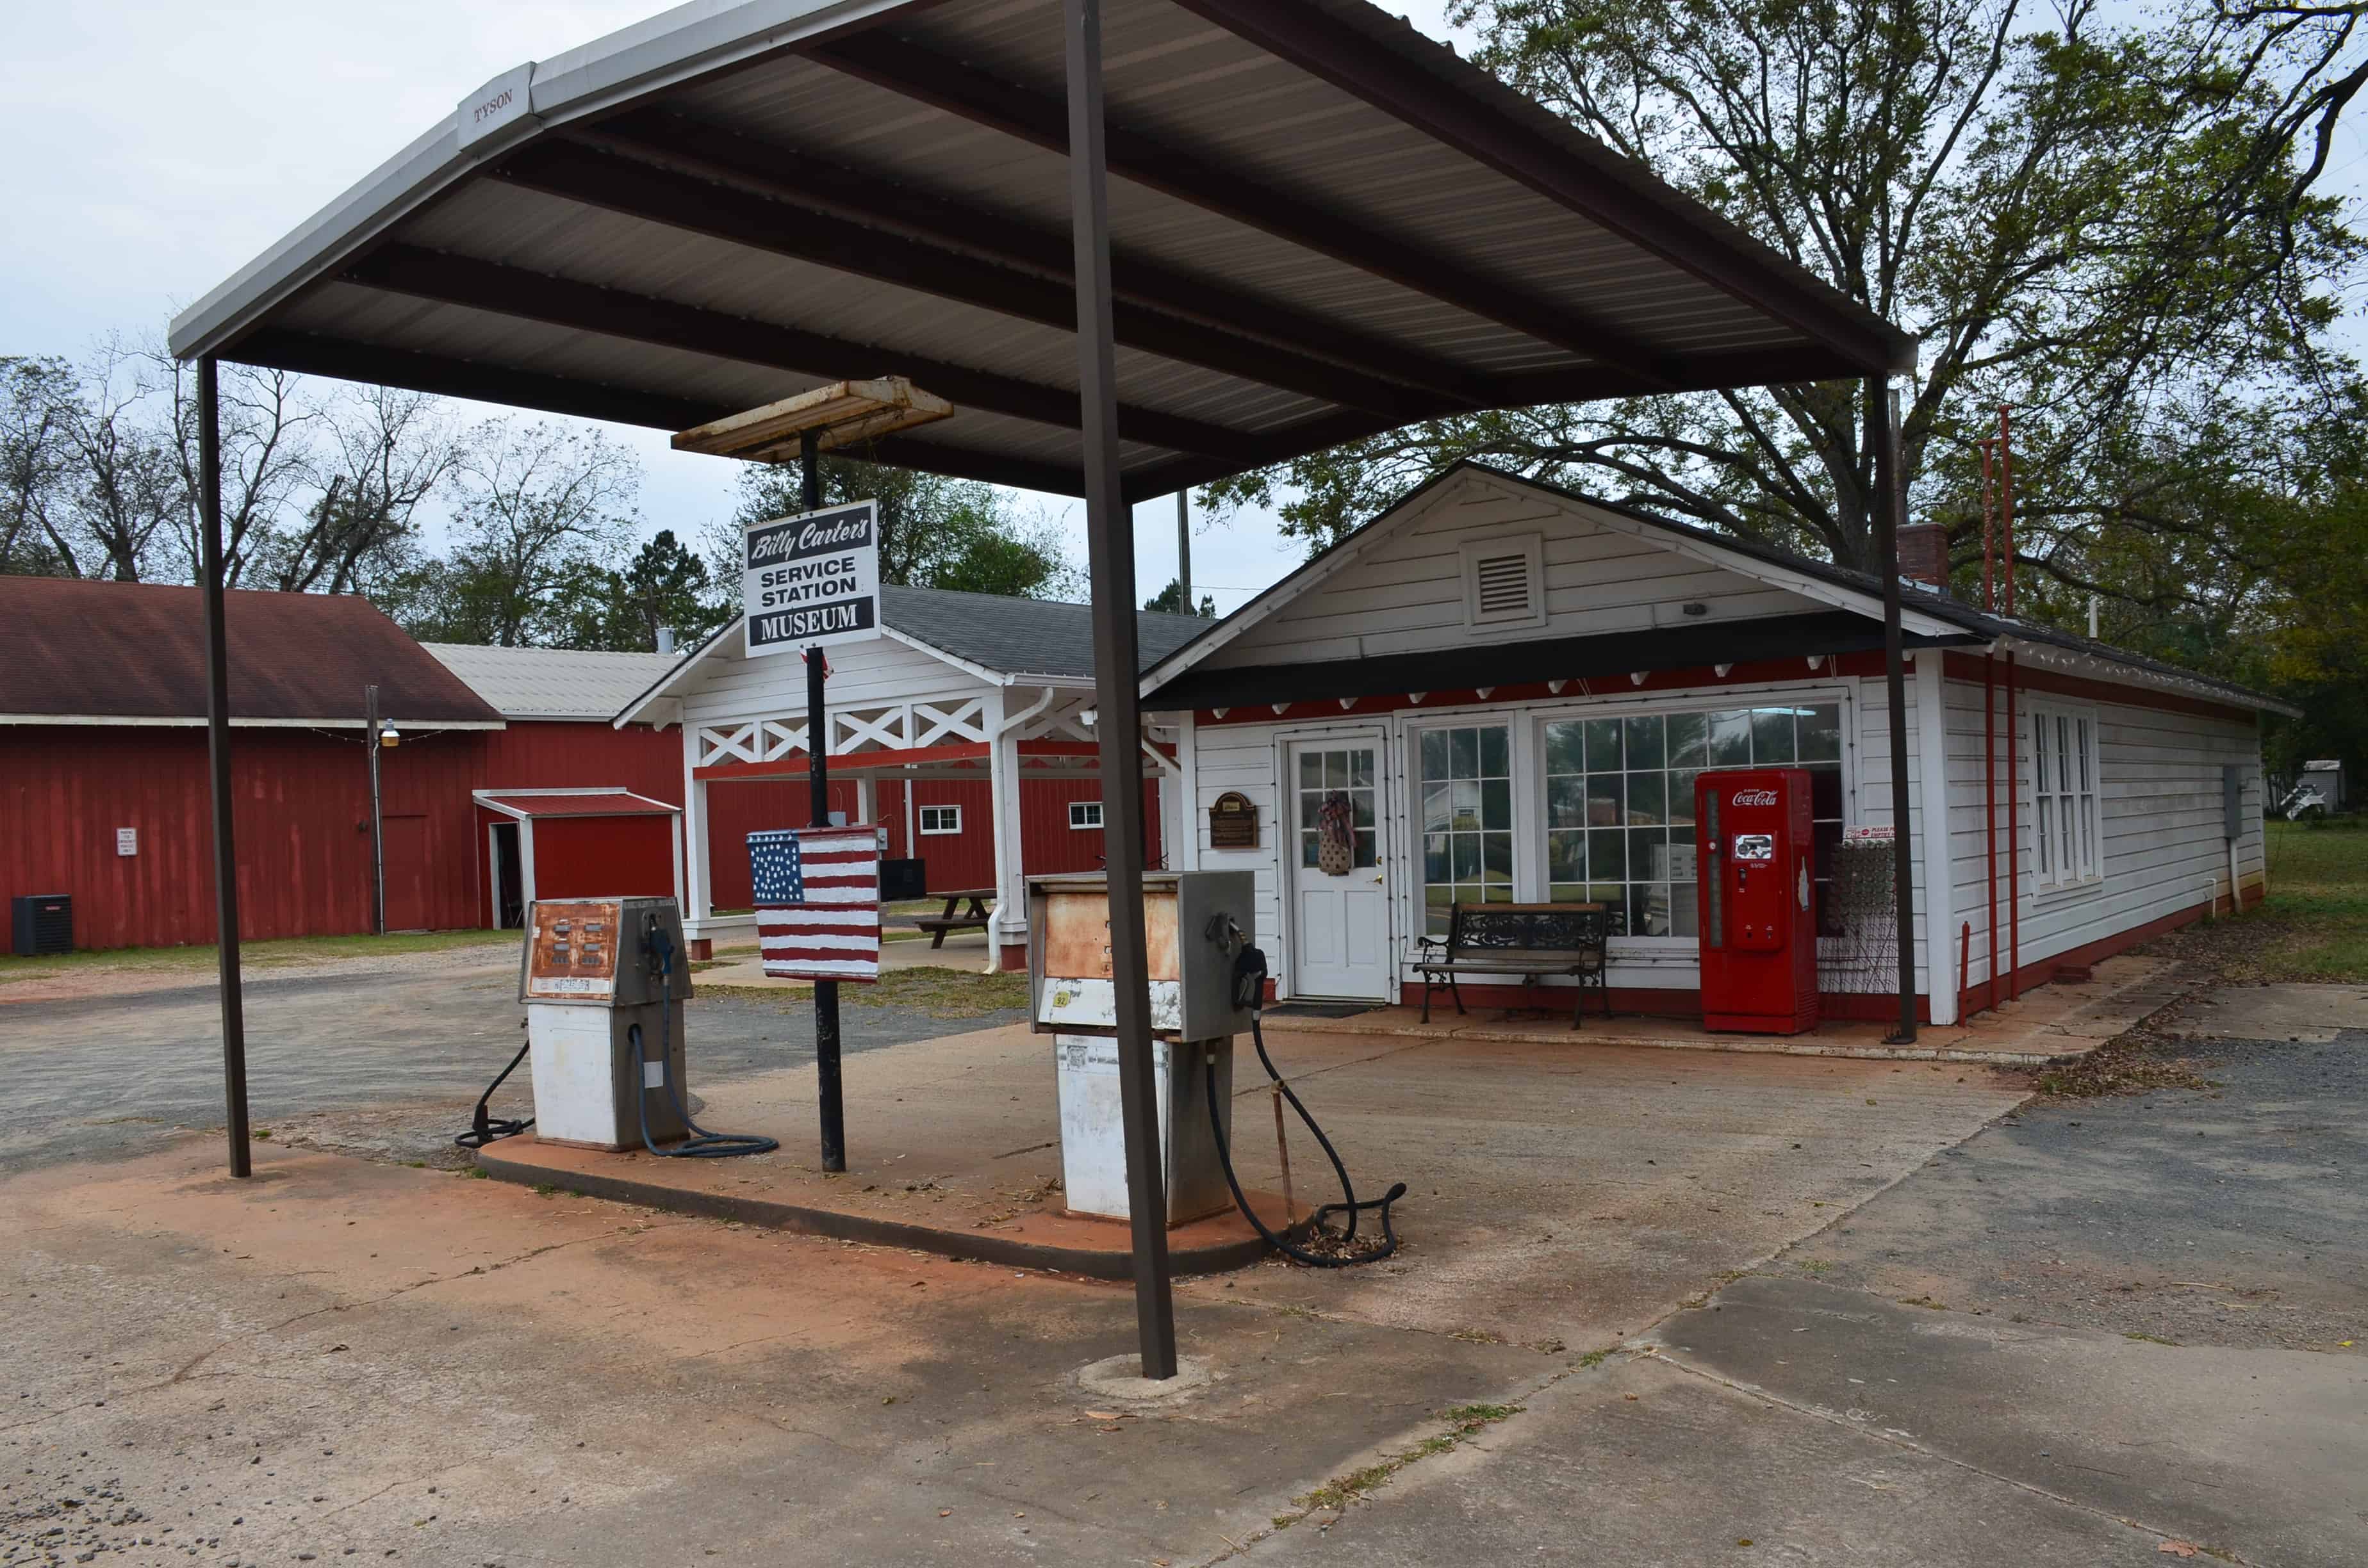 Billy Carter's Service Station in Plains, Georgia